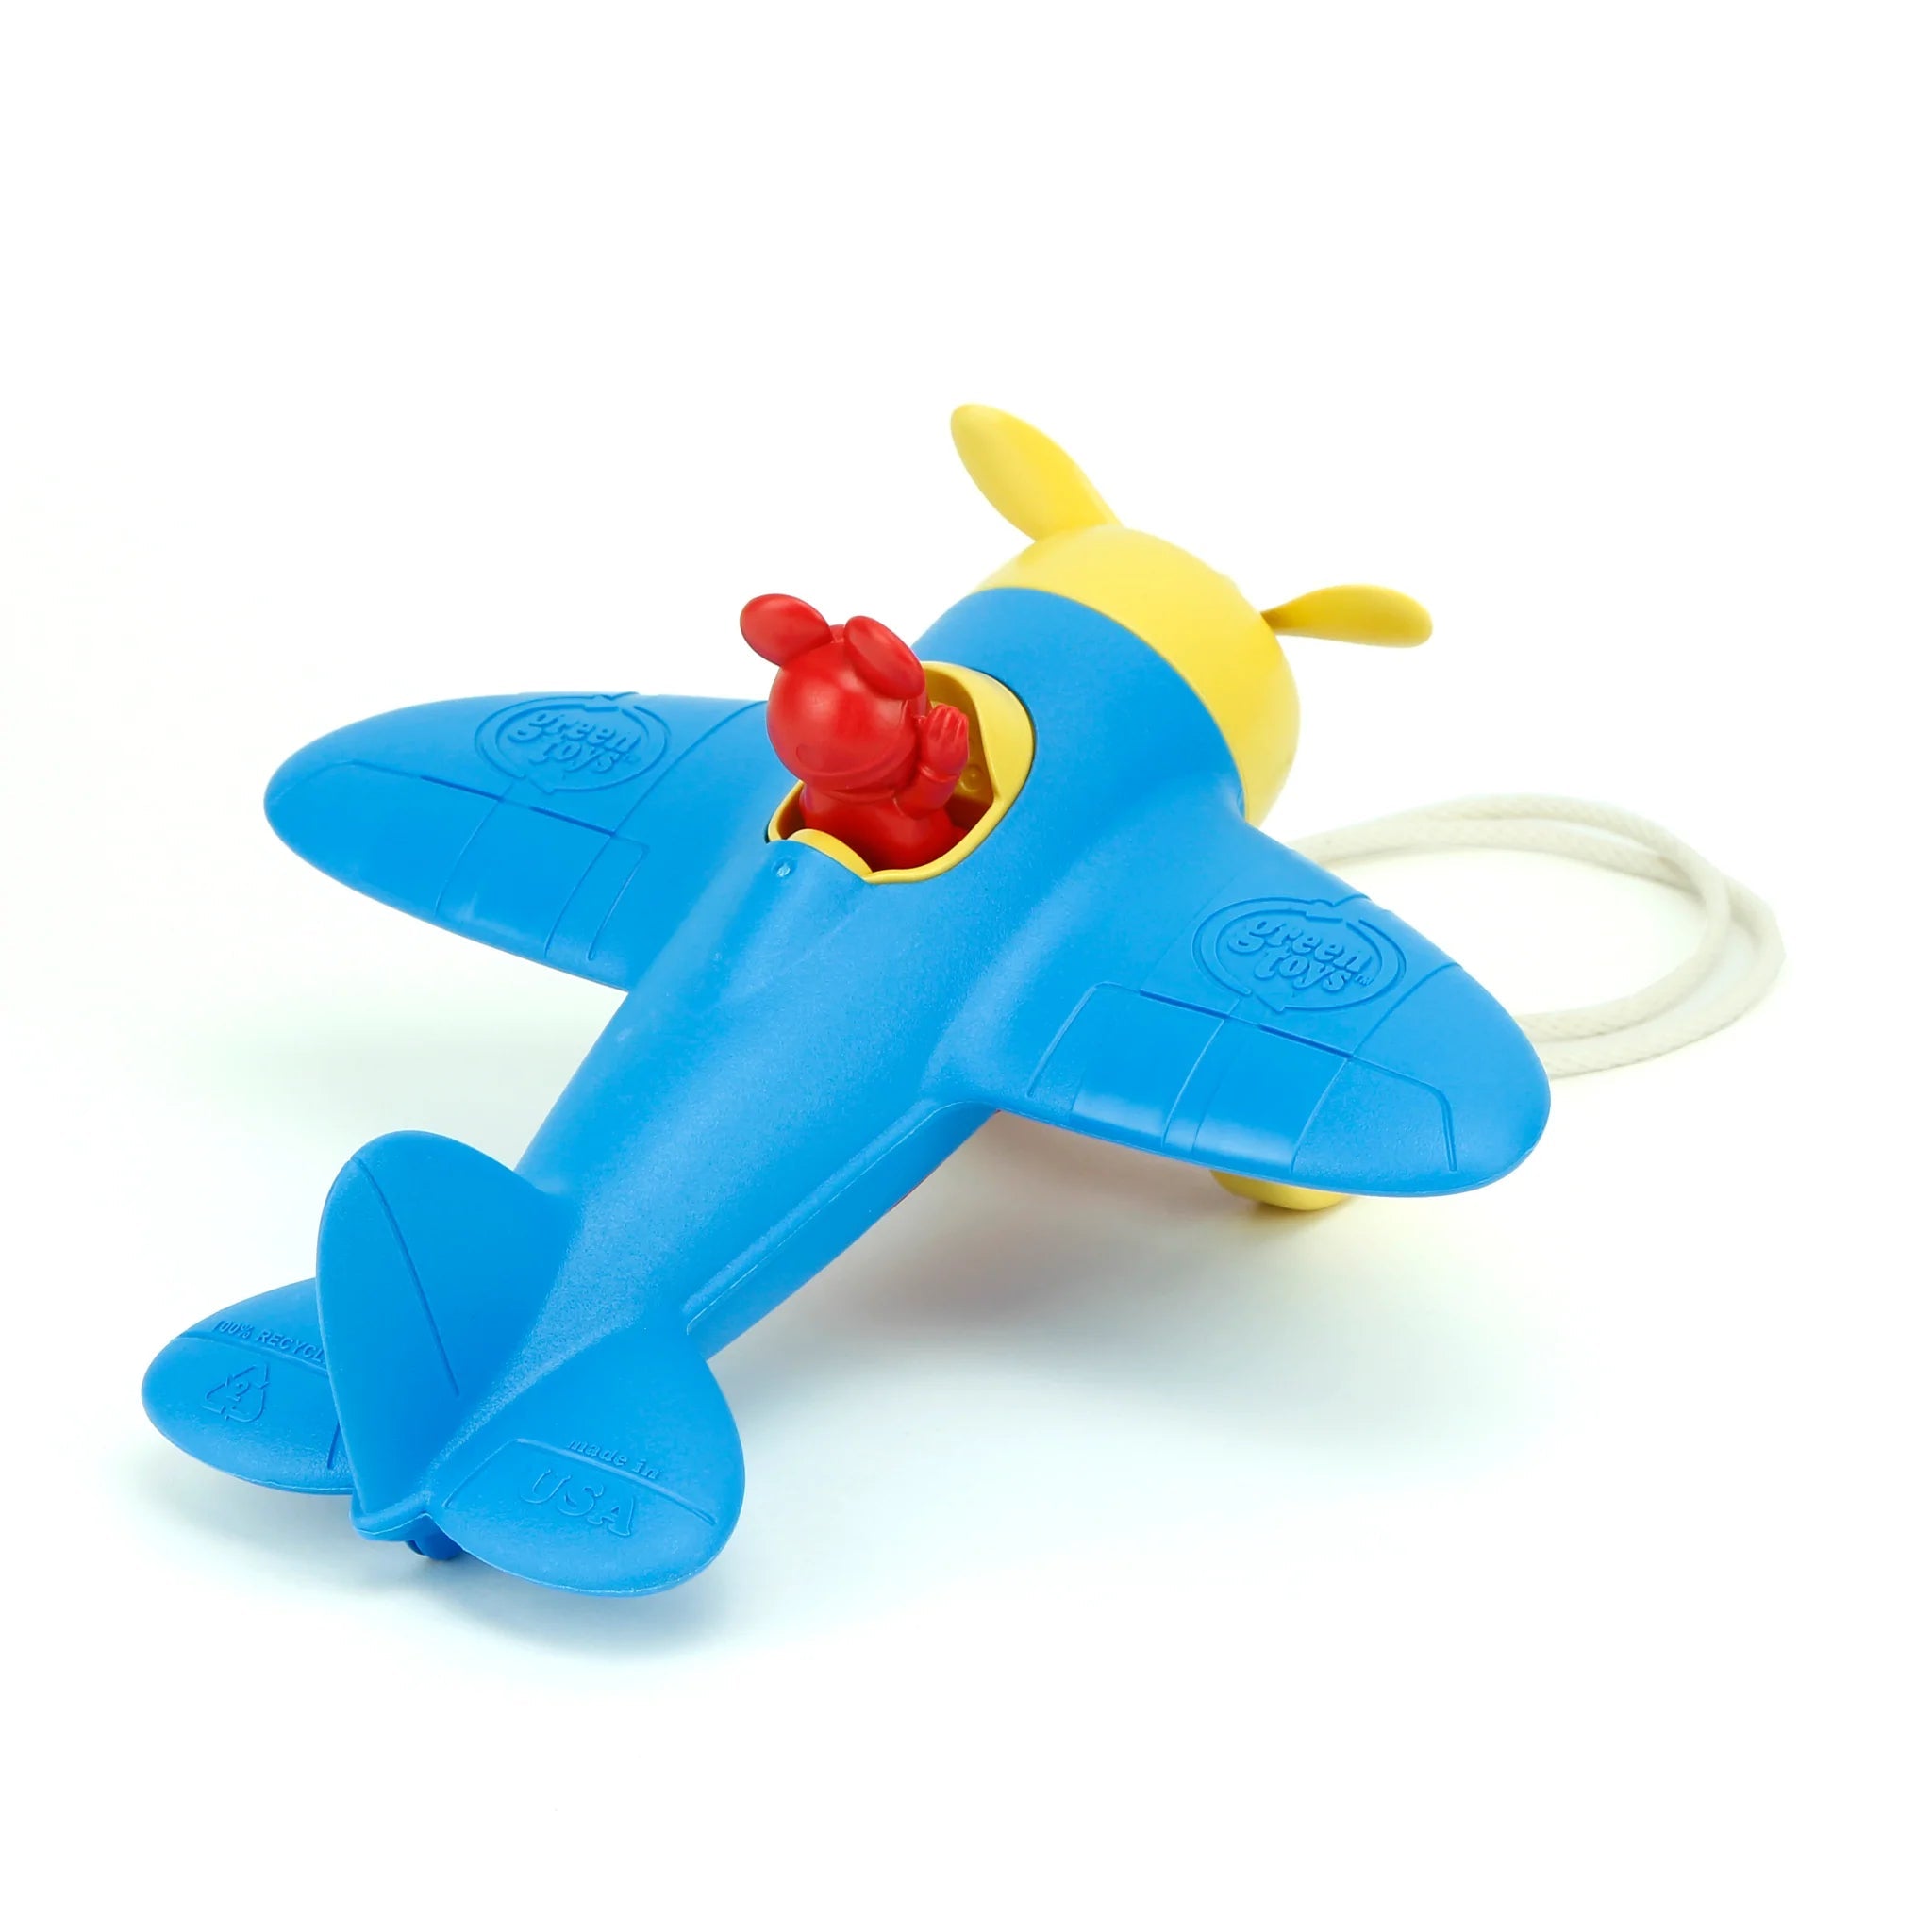 Green Toys Mickey Mouse Airplane Pull Toy - ANB Baby -816409014285$20 - $50